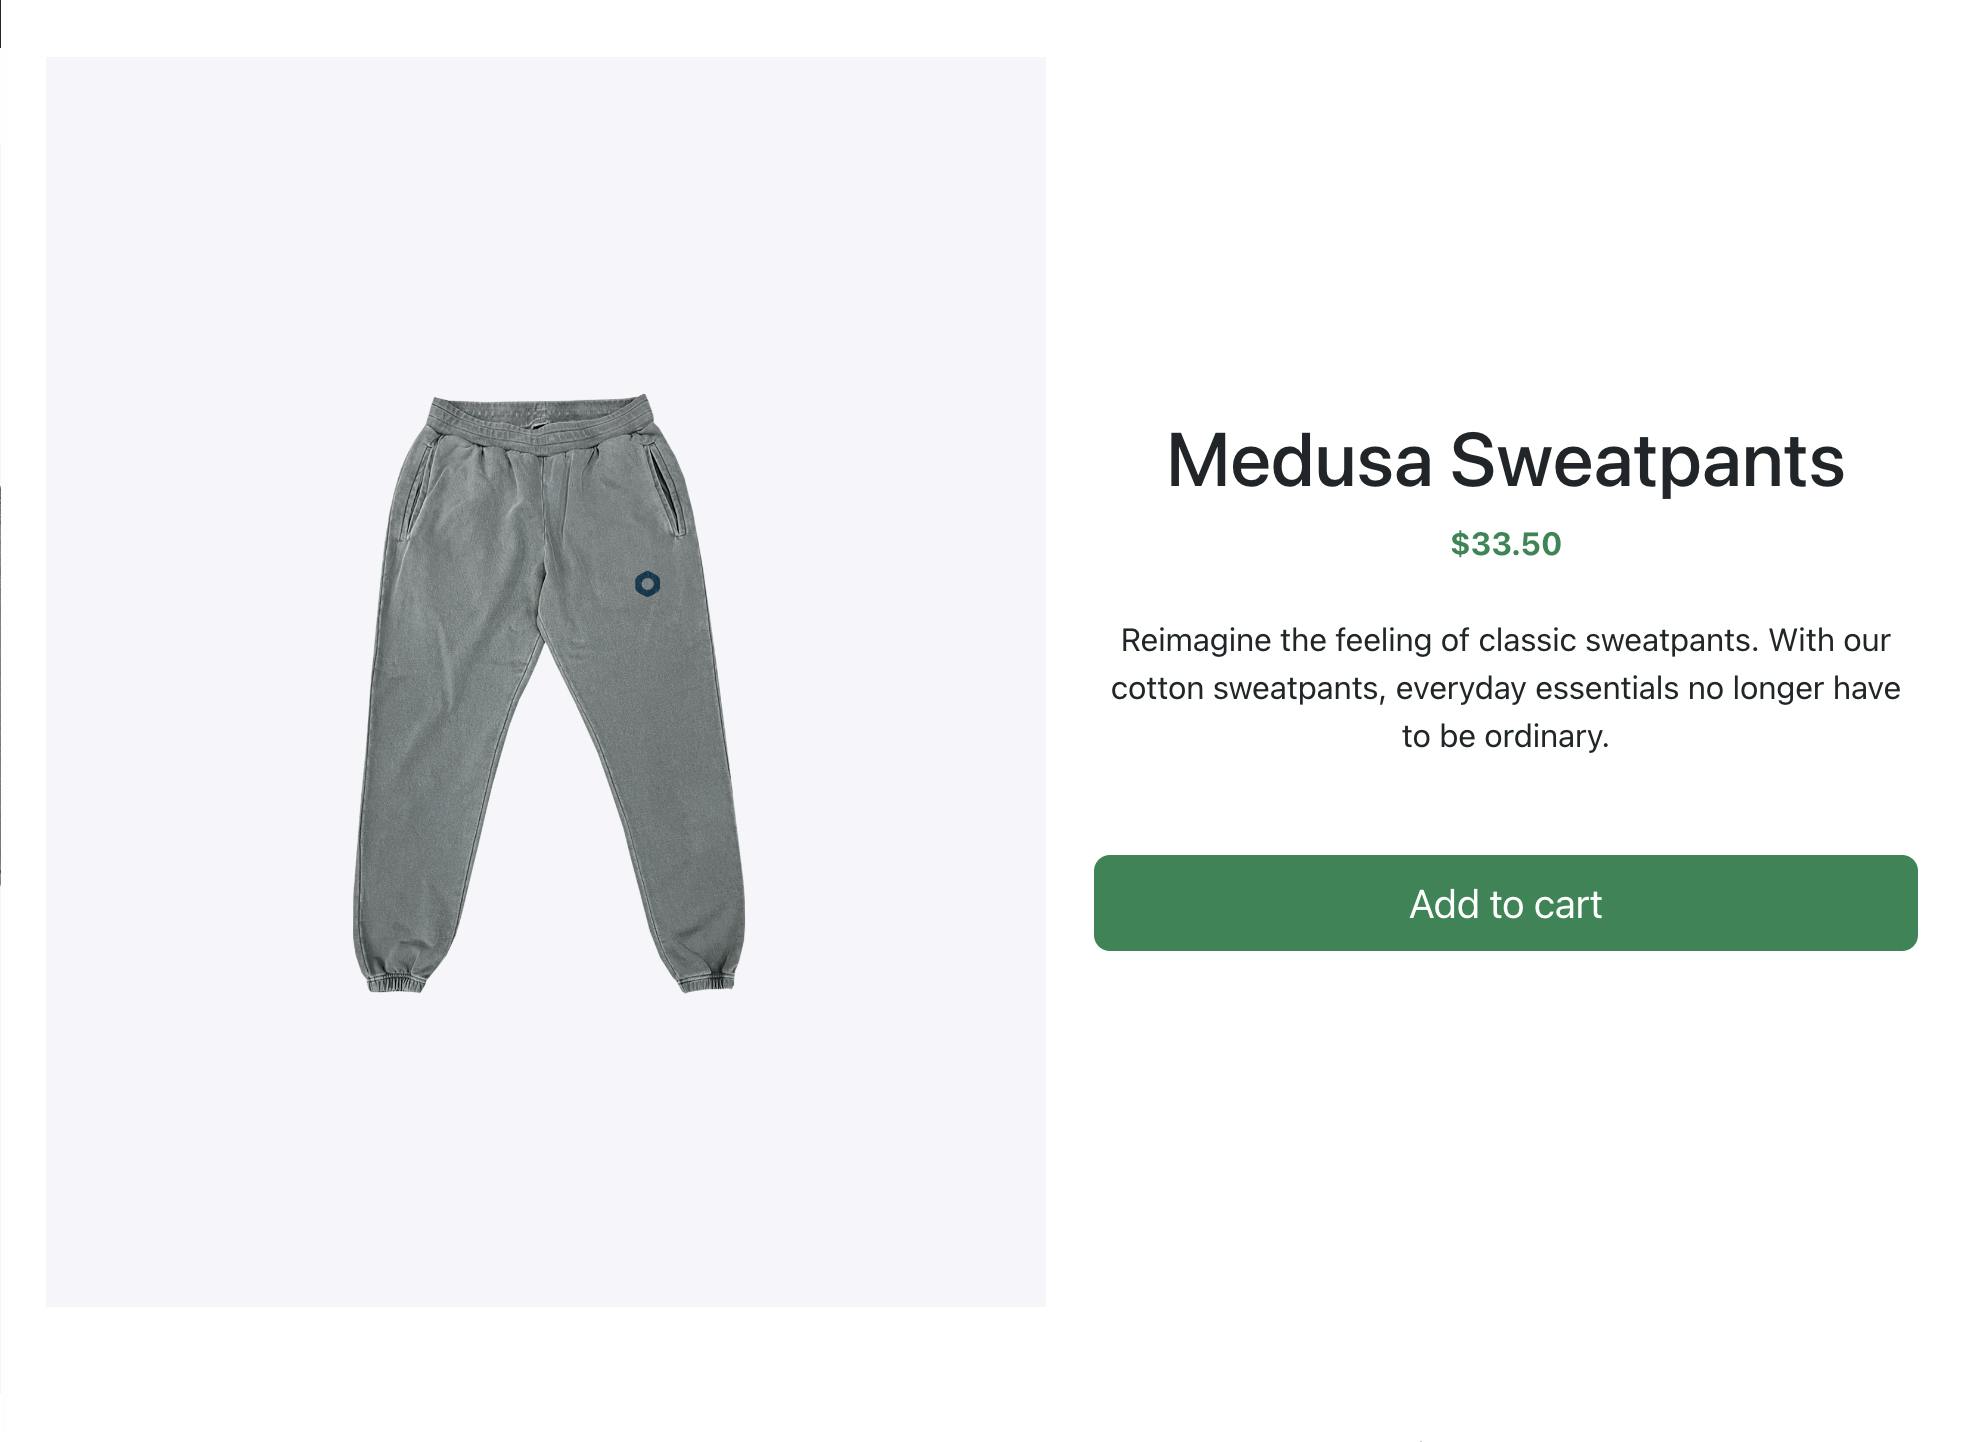 Product page for the “Medusa Sweatpants”